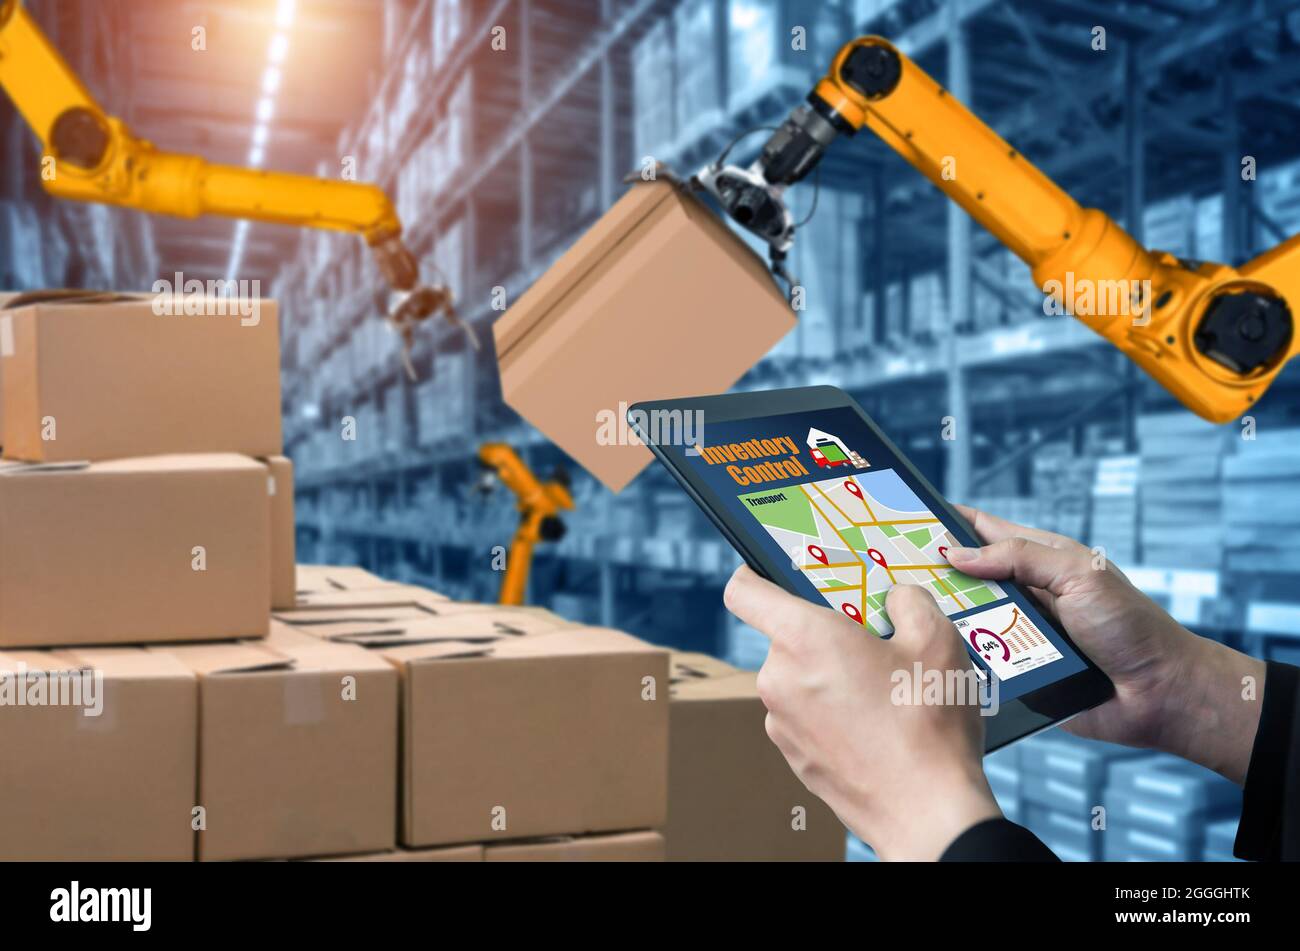 Smart robot arm systems for innovative warehouse and factory digital technology . Automation manufacturing robot controlled by industry engineering Stock Photo